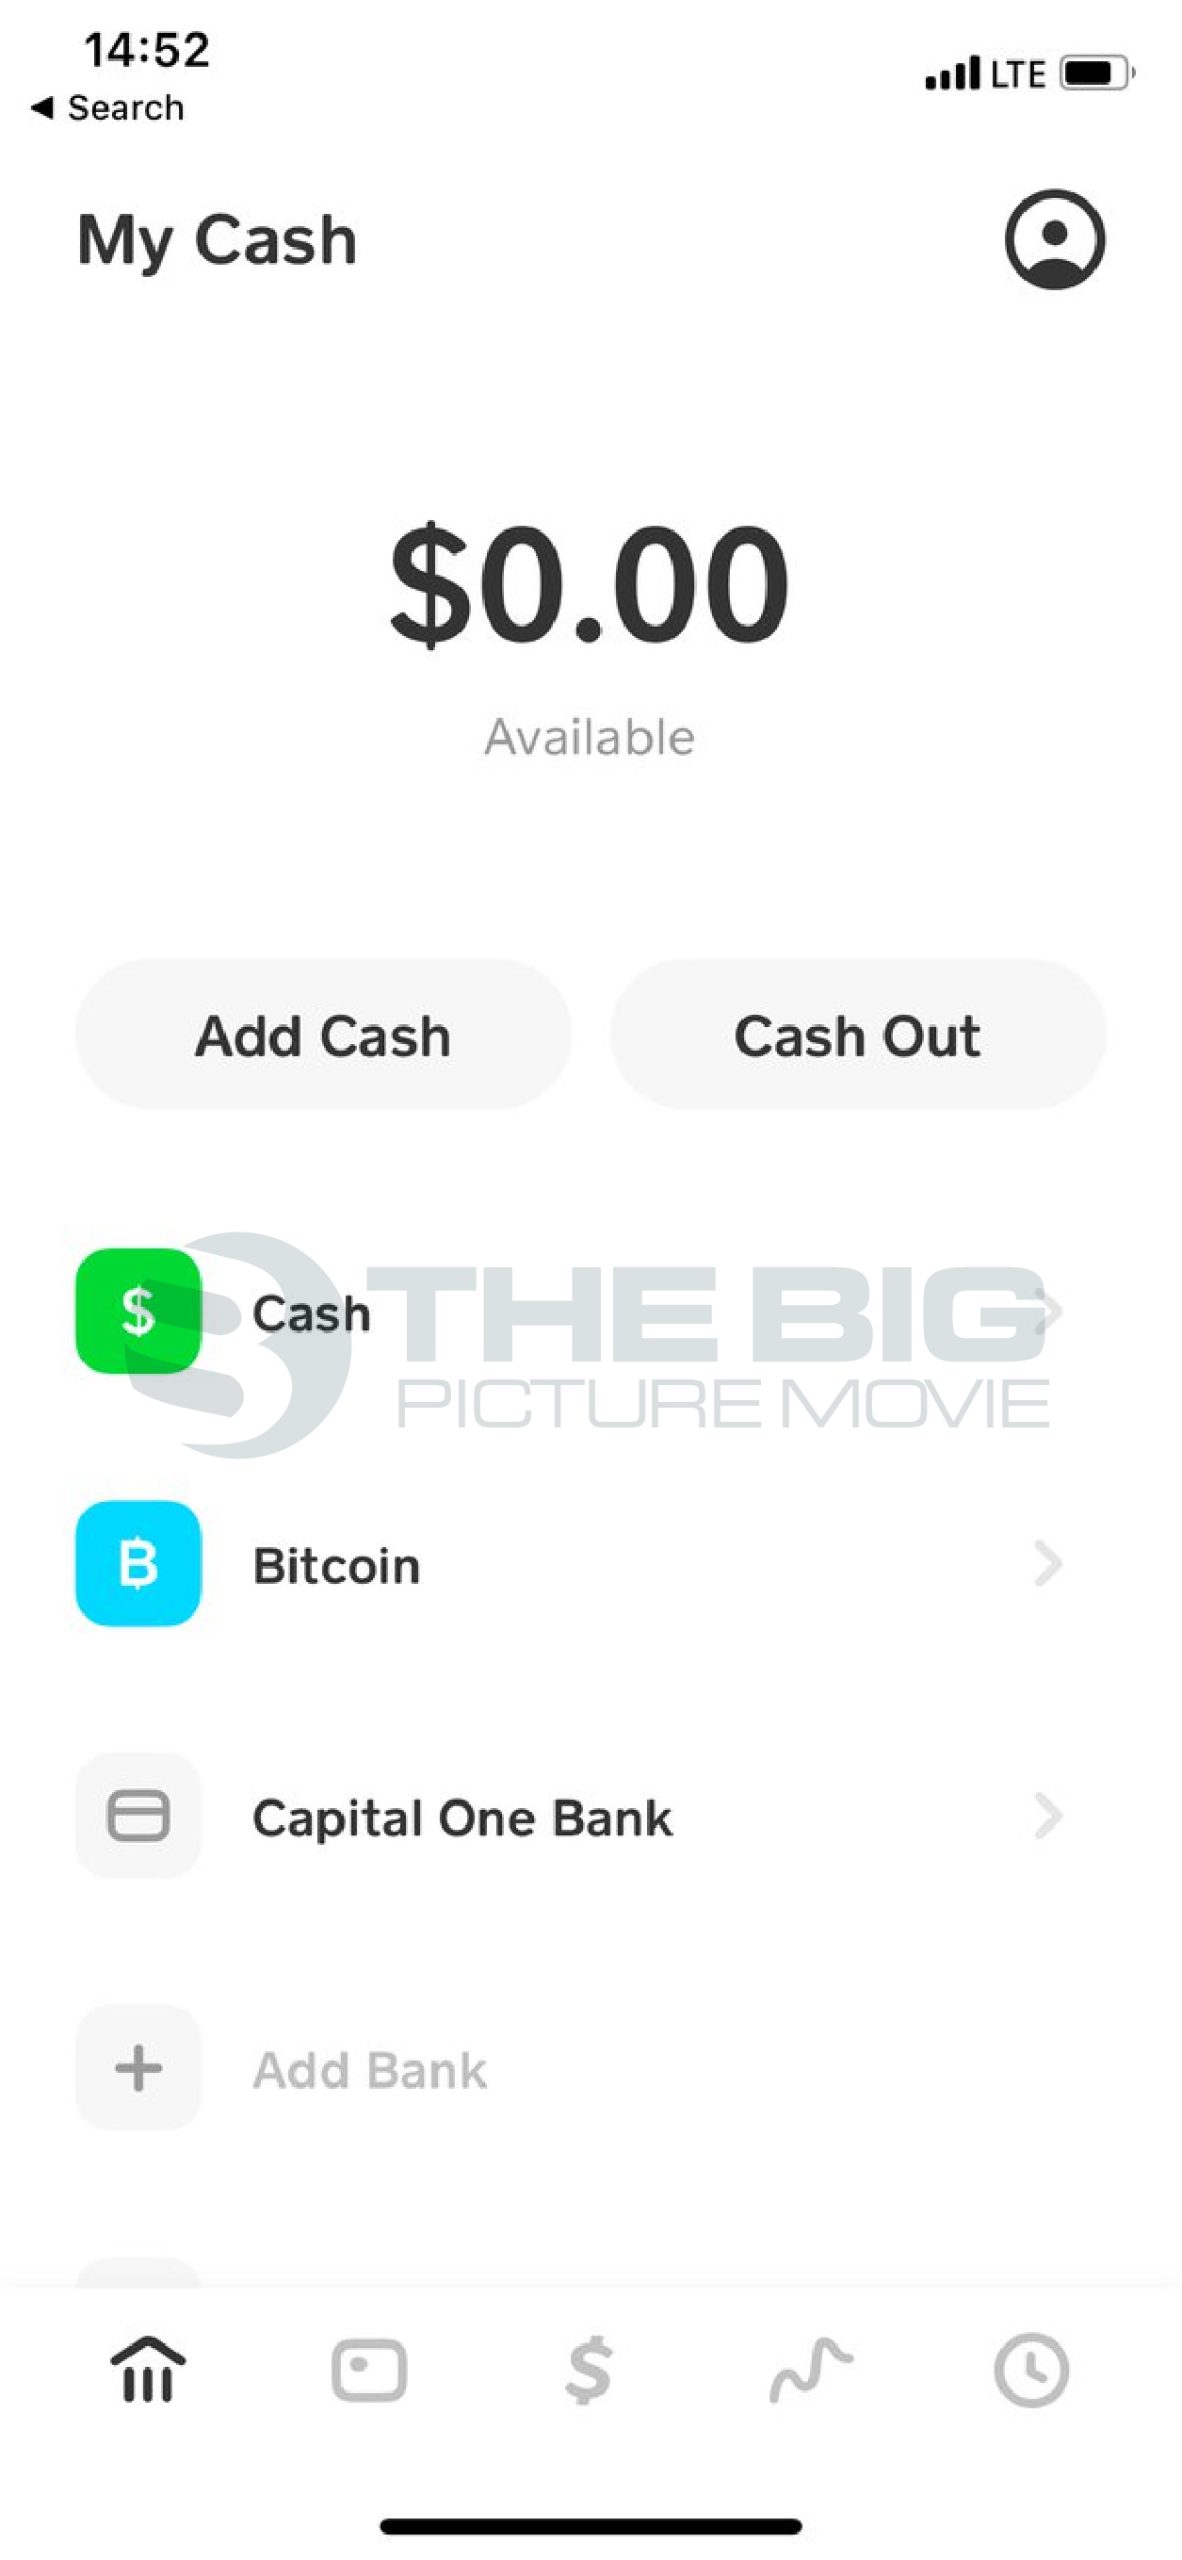 Tap on Bitcoin to Withdraw 